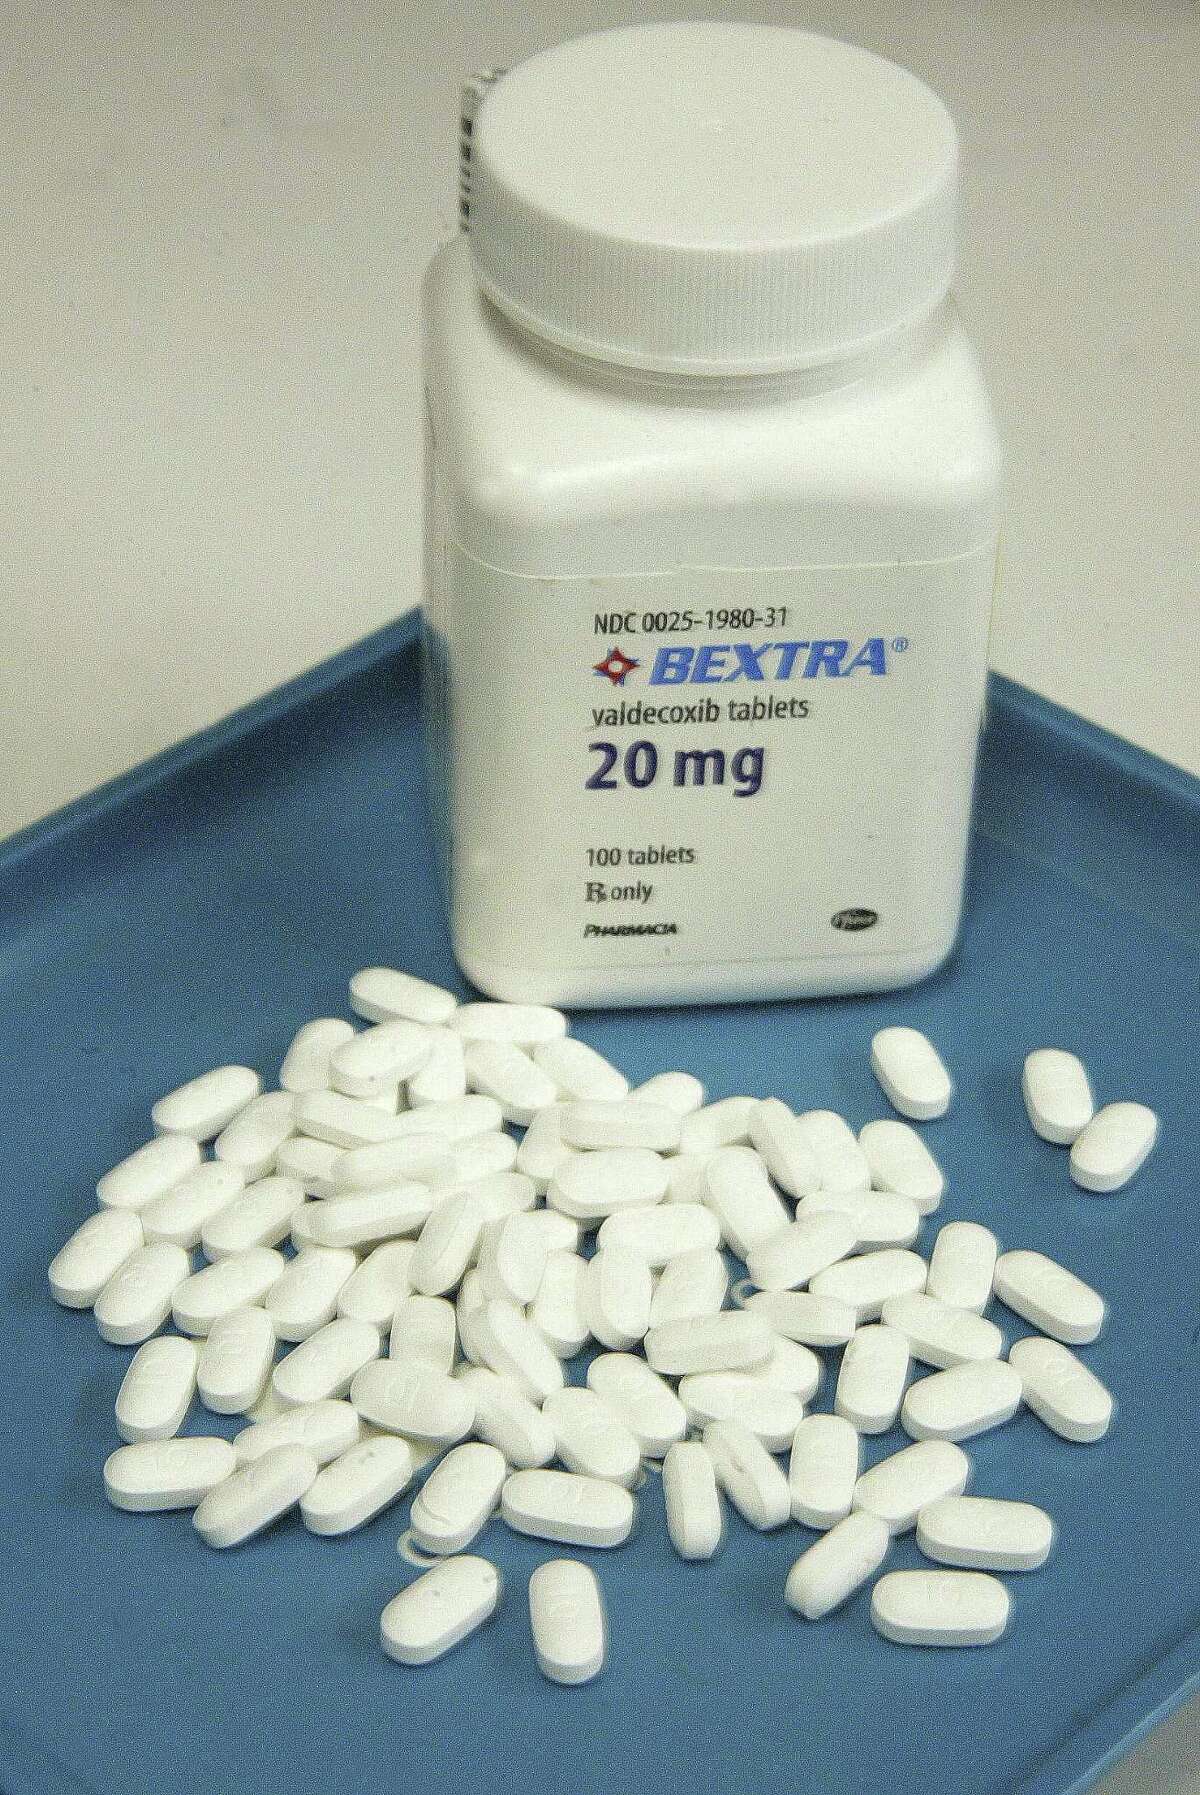 Almost one-third of new drugs approved by FDA from 2001-2010, ended up years later with warnings about unexpected, sometimes life-threatening side effects or complications, according to the Journal of the American Medical Association. The painkiller Bextra was taken off the market in 2005 because of an increased risk of heart problems.